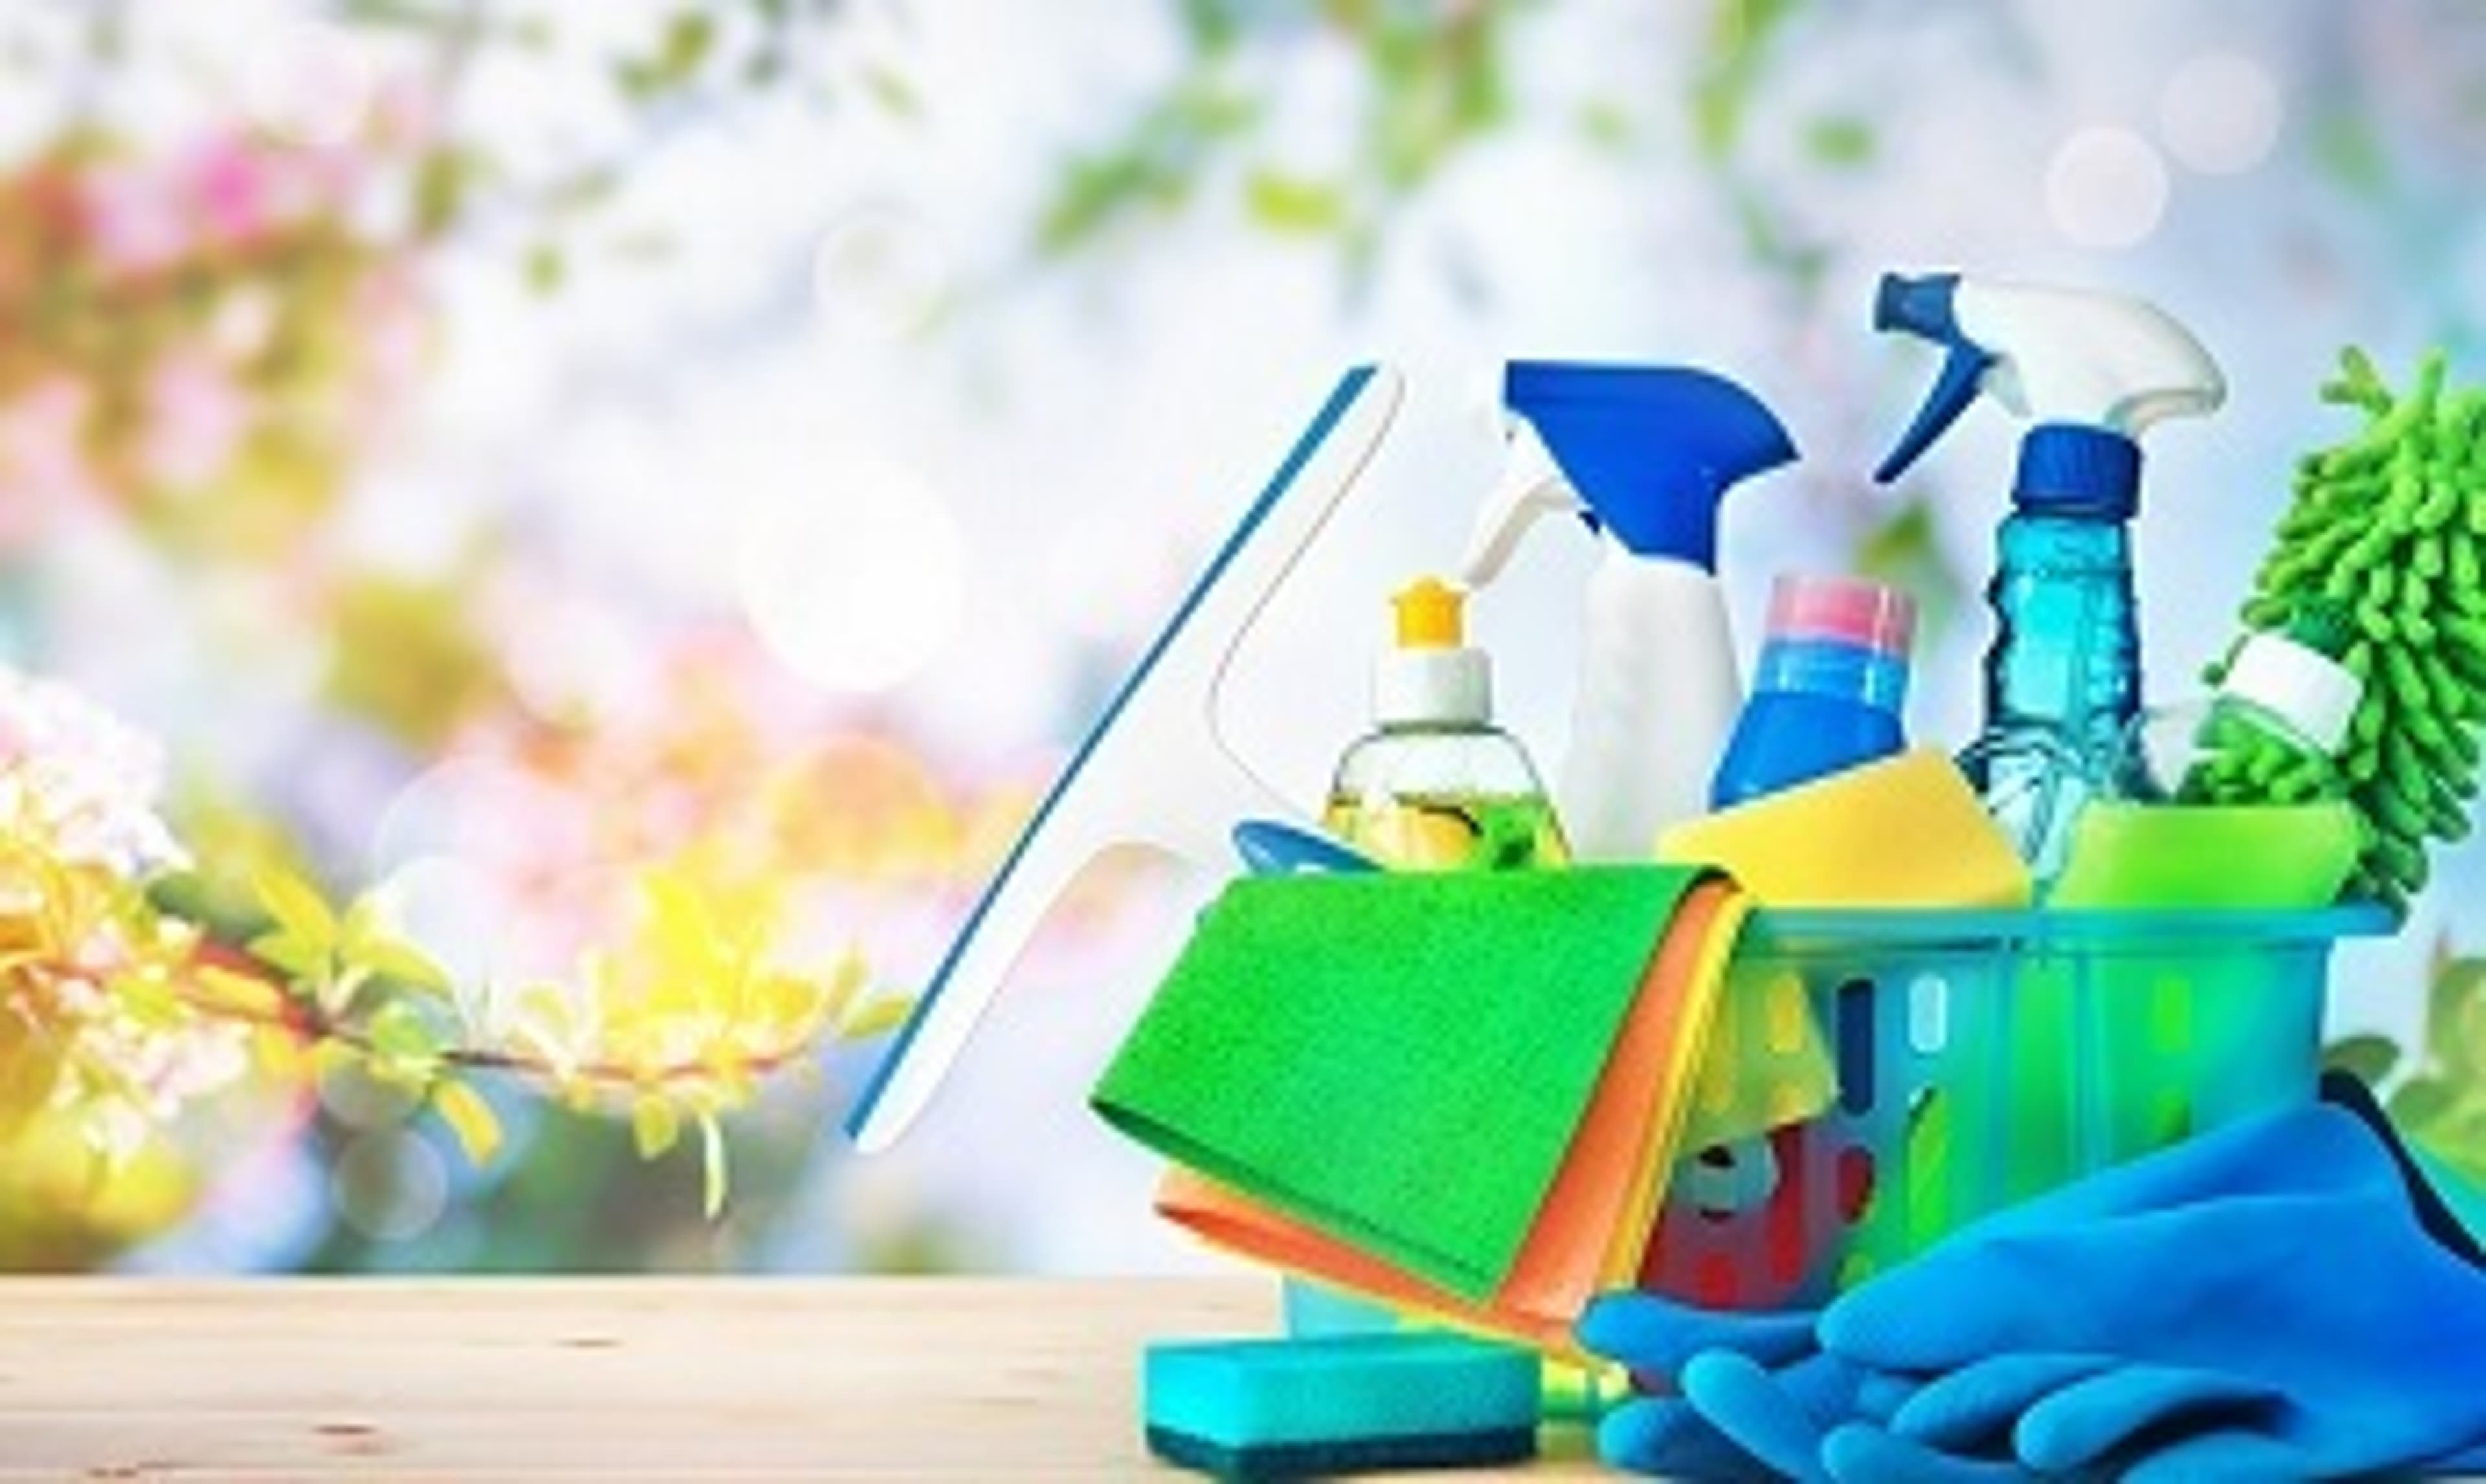  A selection of cleaning products against a blossom background 